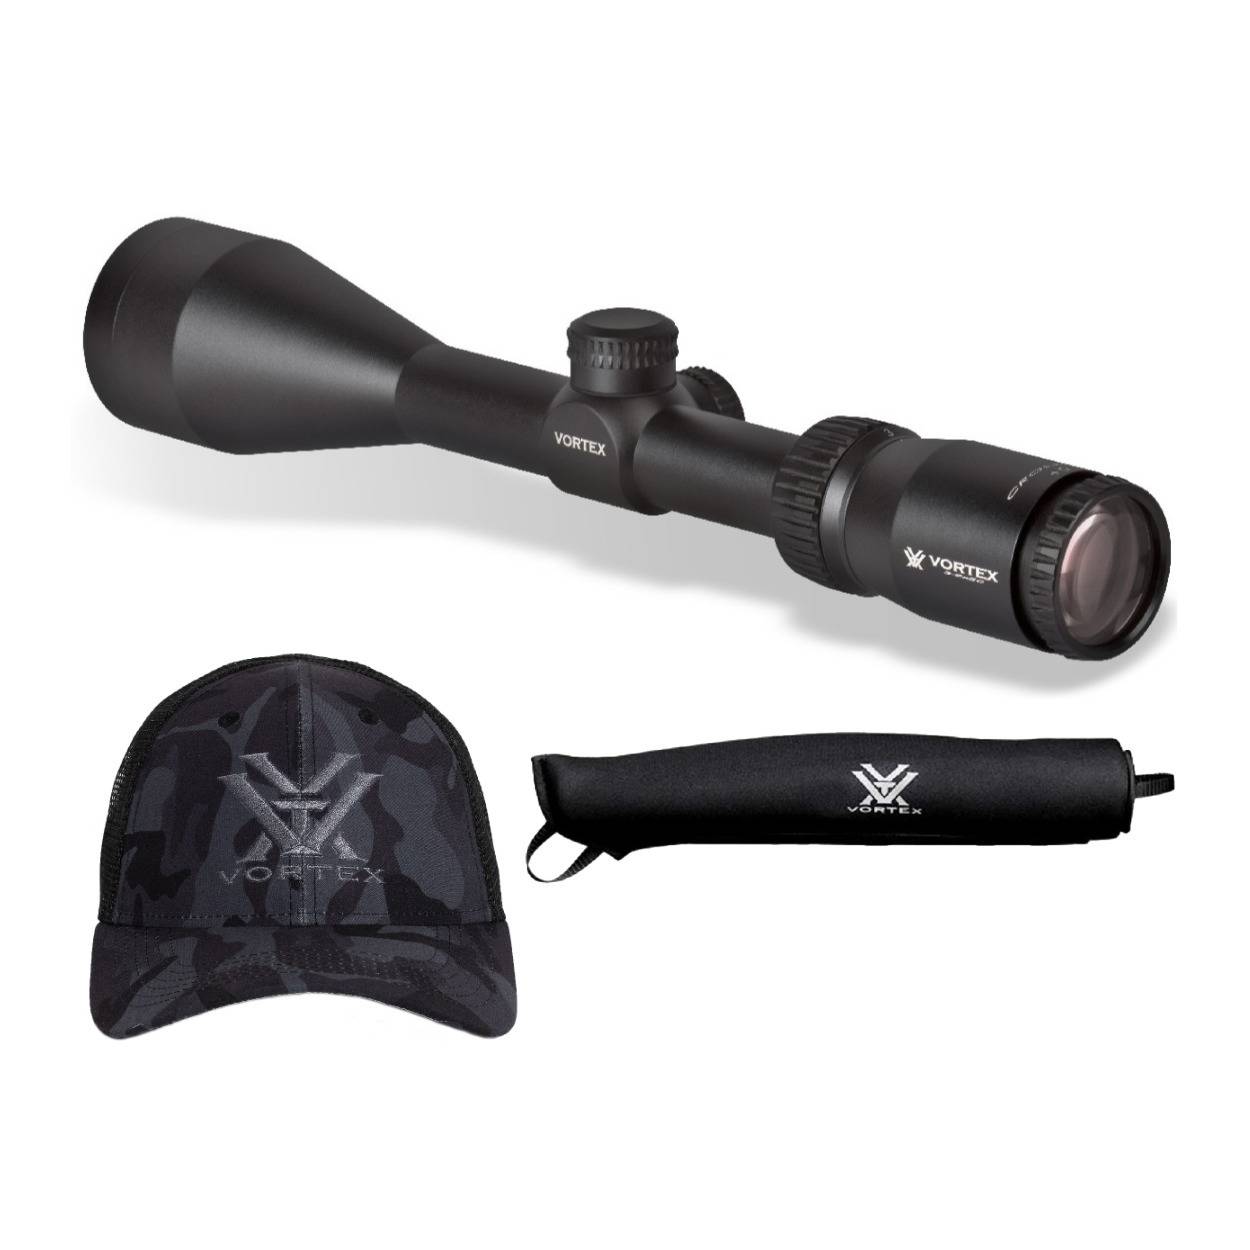 Vortex Crossfire II 3-9x50 Riflescope (Dead-Hold BDC MOA Reticle) with Sure Fit Cover and Cap